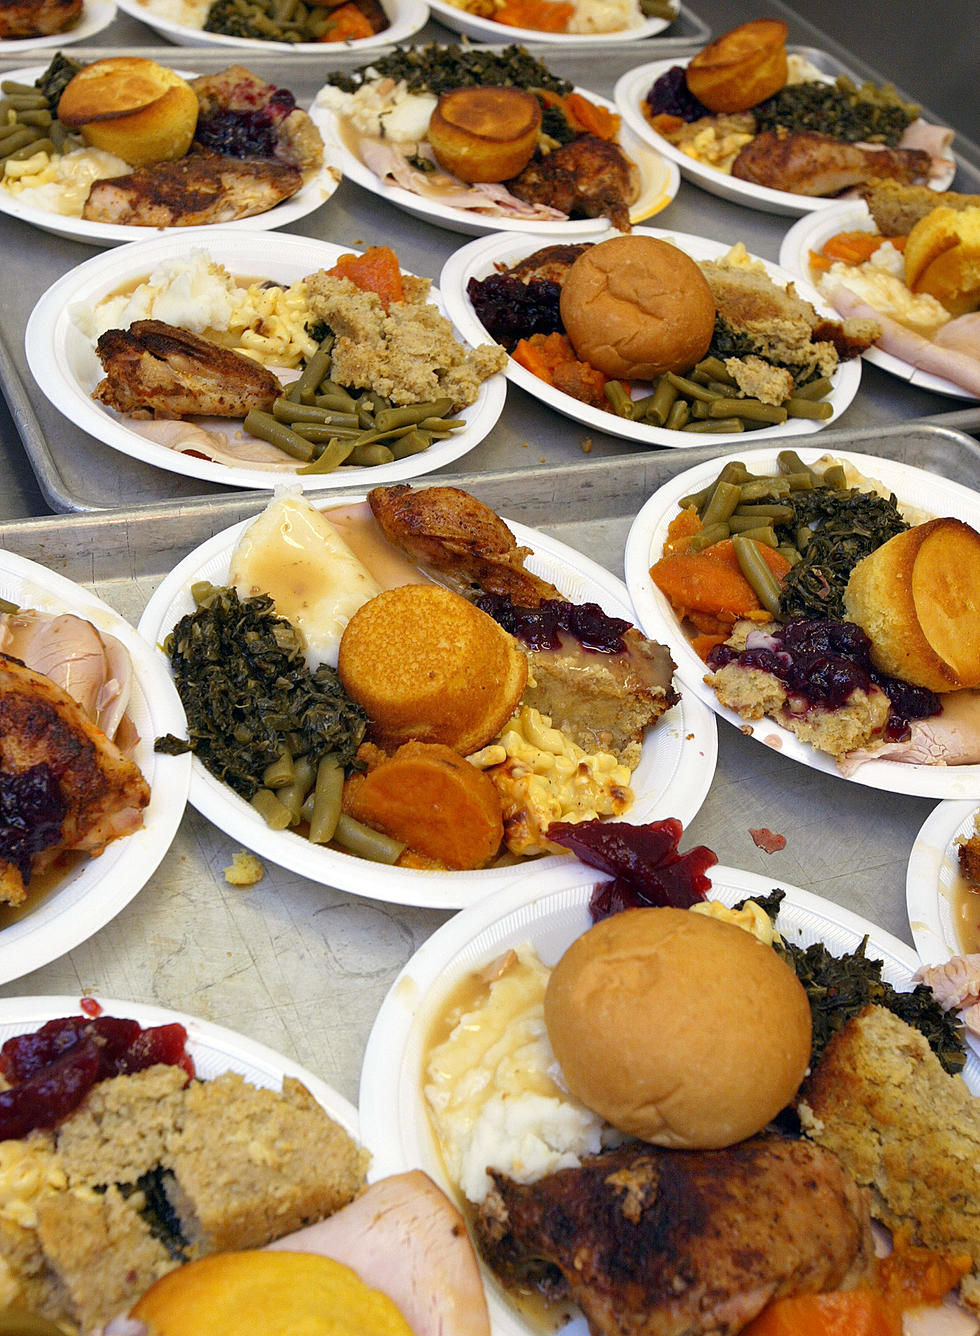 Average Price Of Thanksgiving Meal This Year